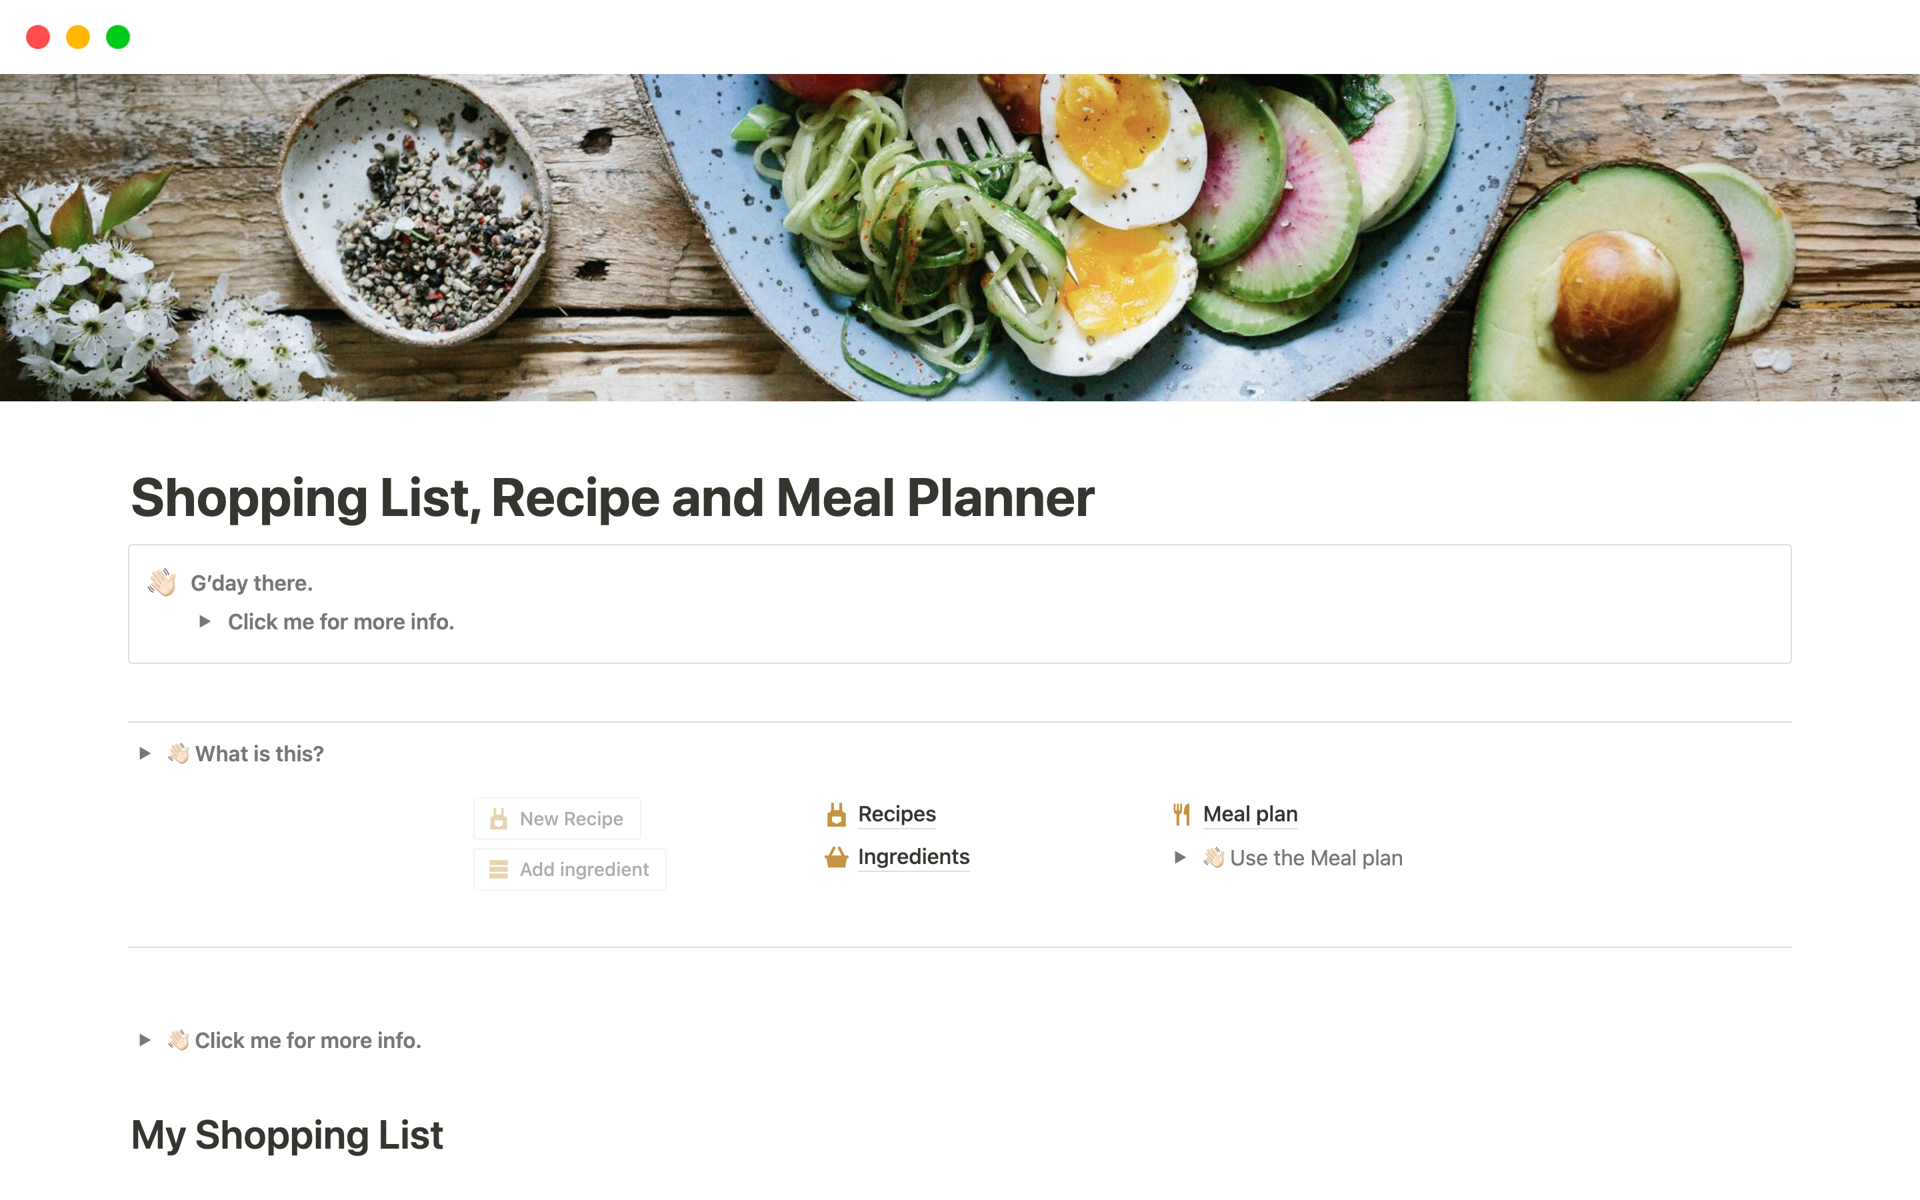 I created this template to simplify your weekly journey to the supermarket, as well as motivate you to try some new recipes.